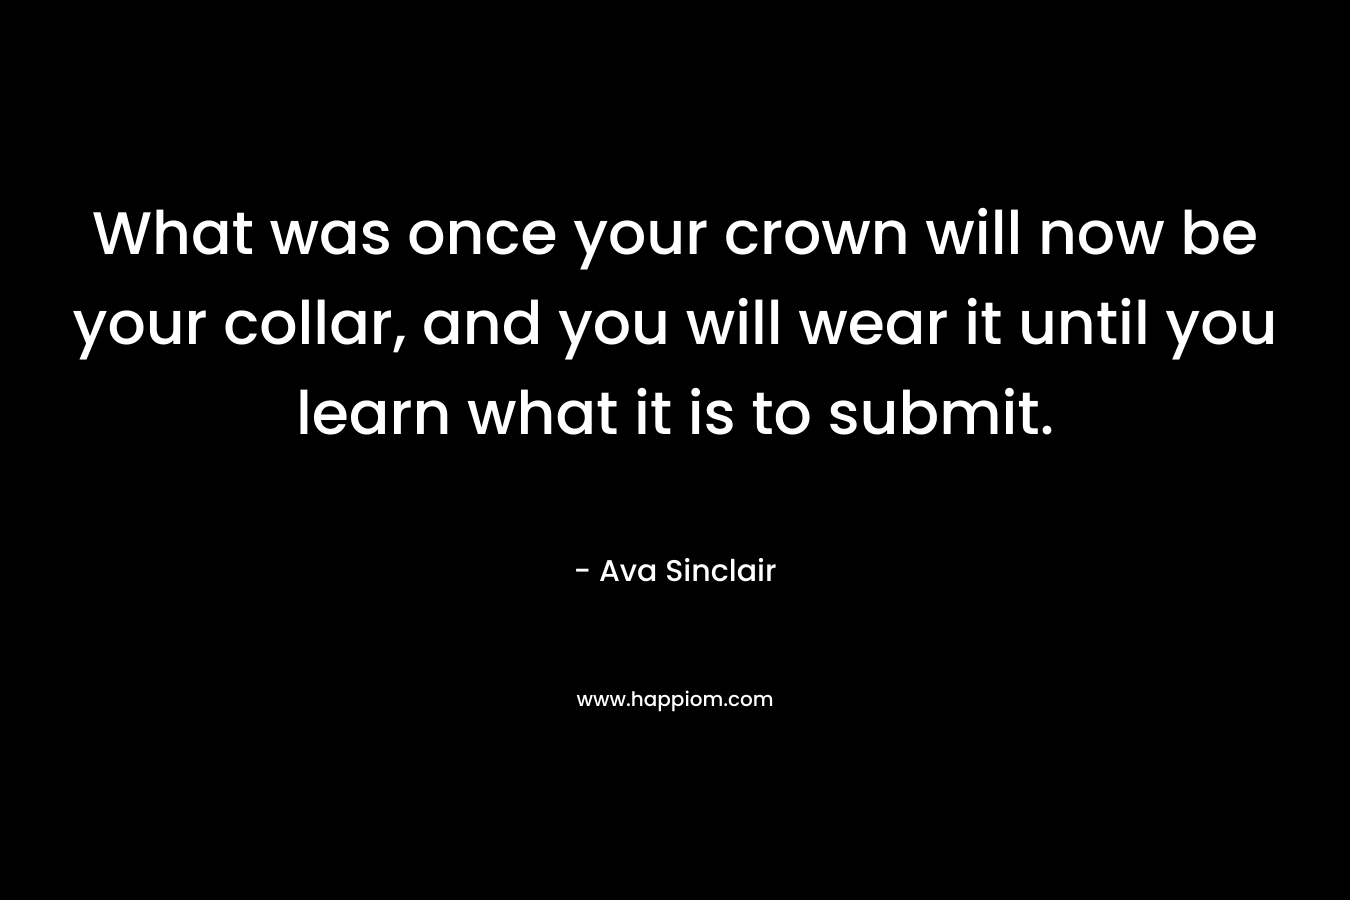 What was once your crown will now be your collar, and you will wear it until you learn what it is to submit.